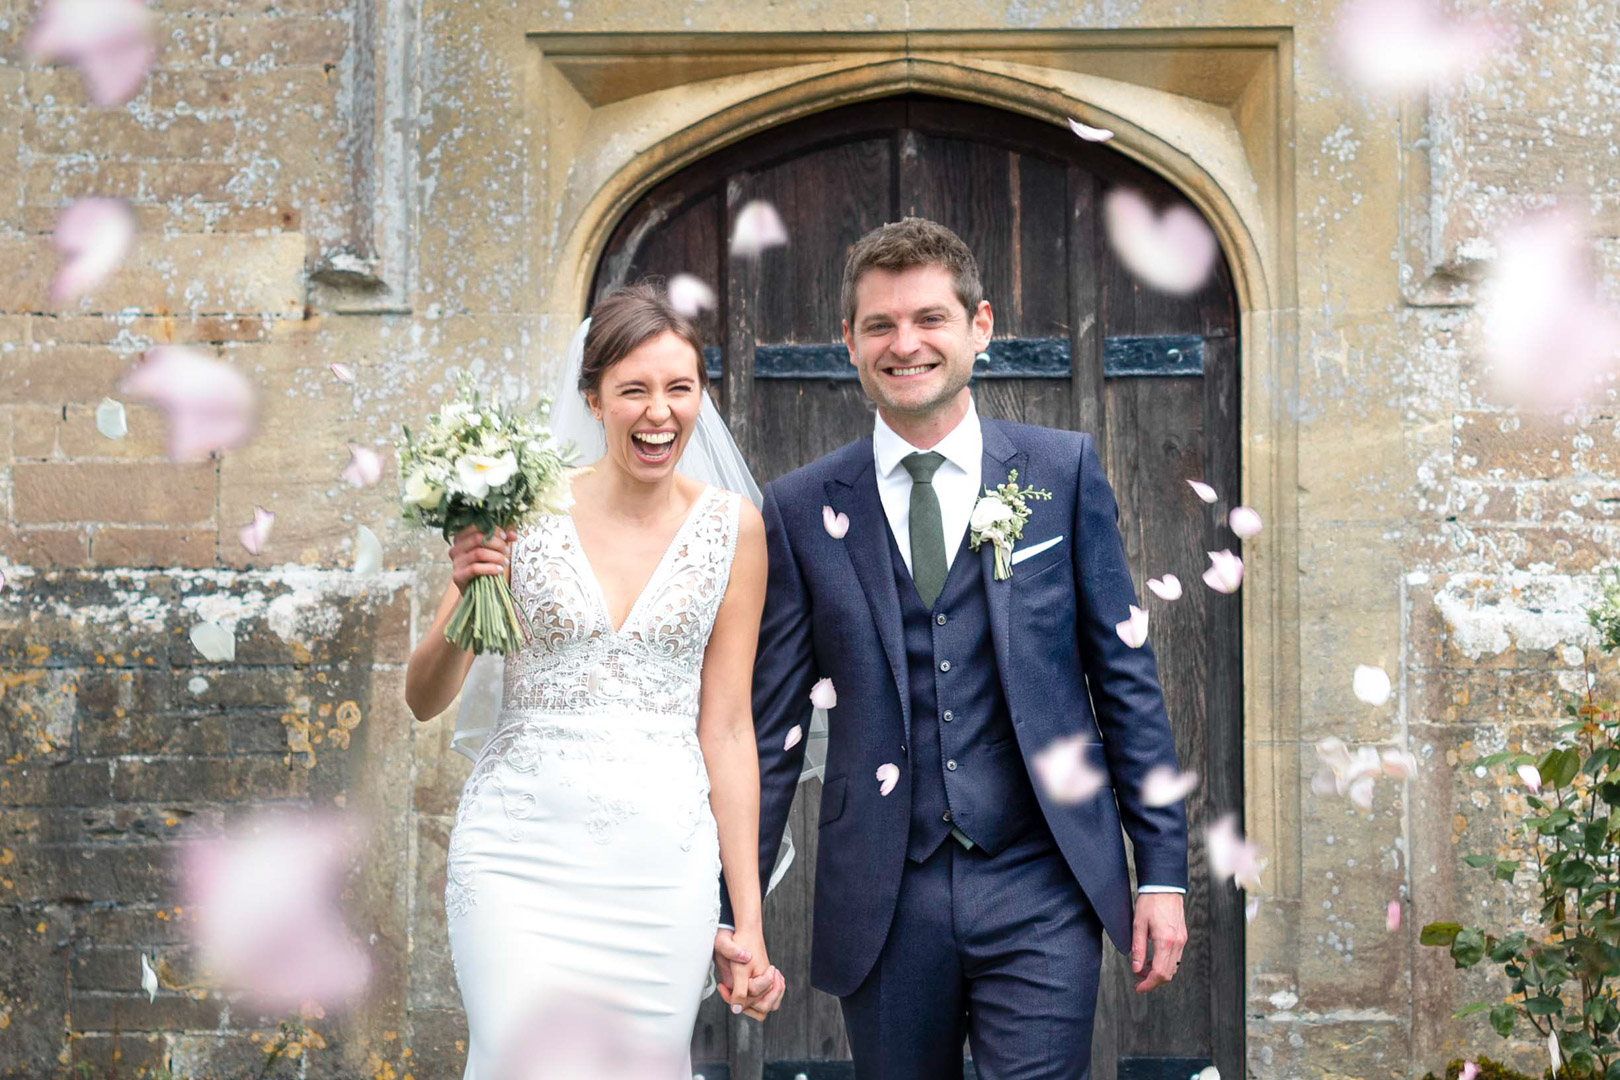 Bride & Groom showered with pink heart shaped confetti